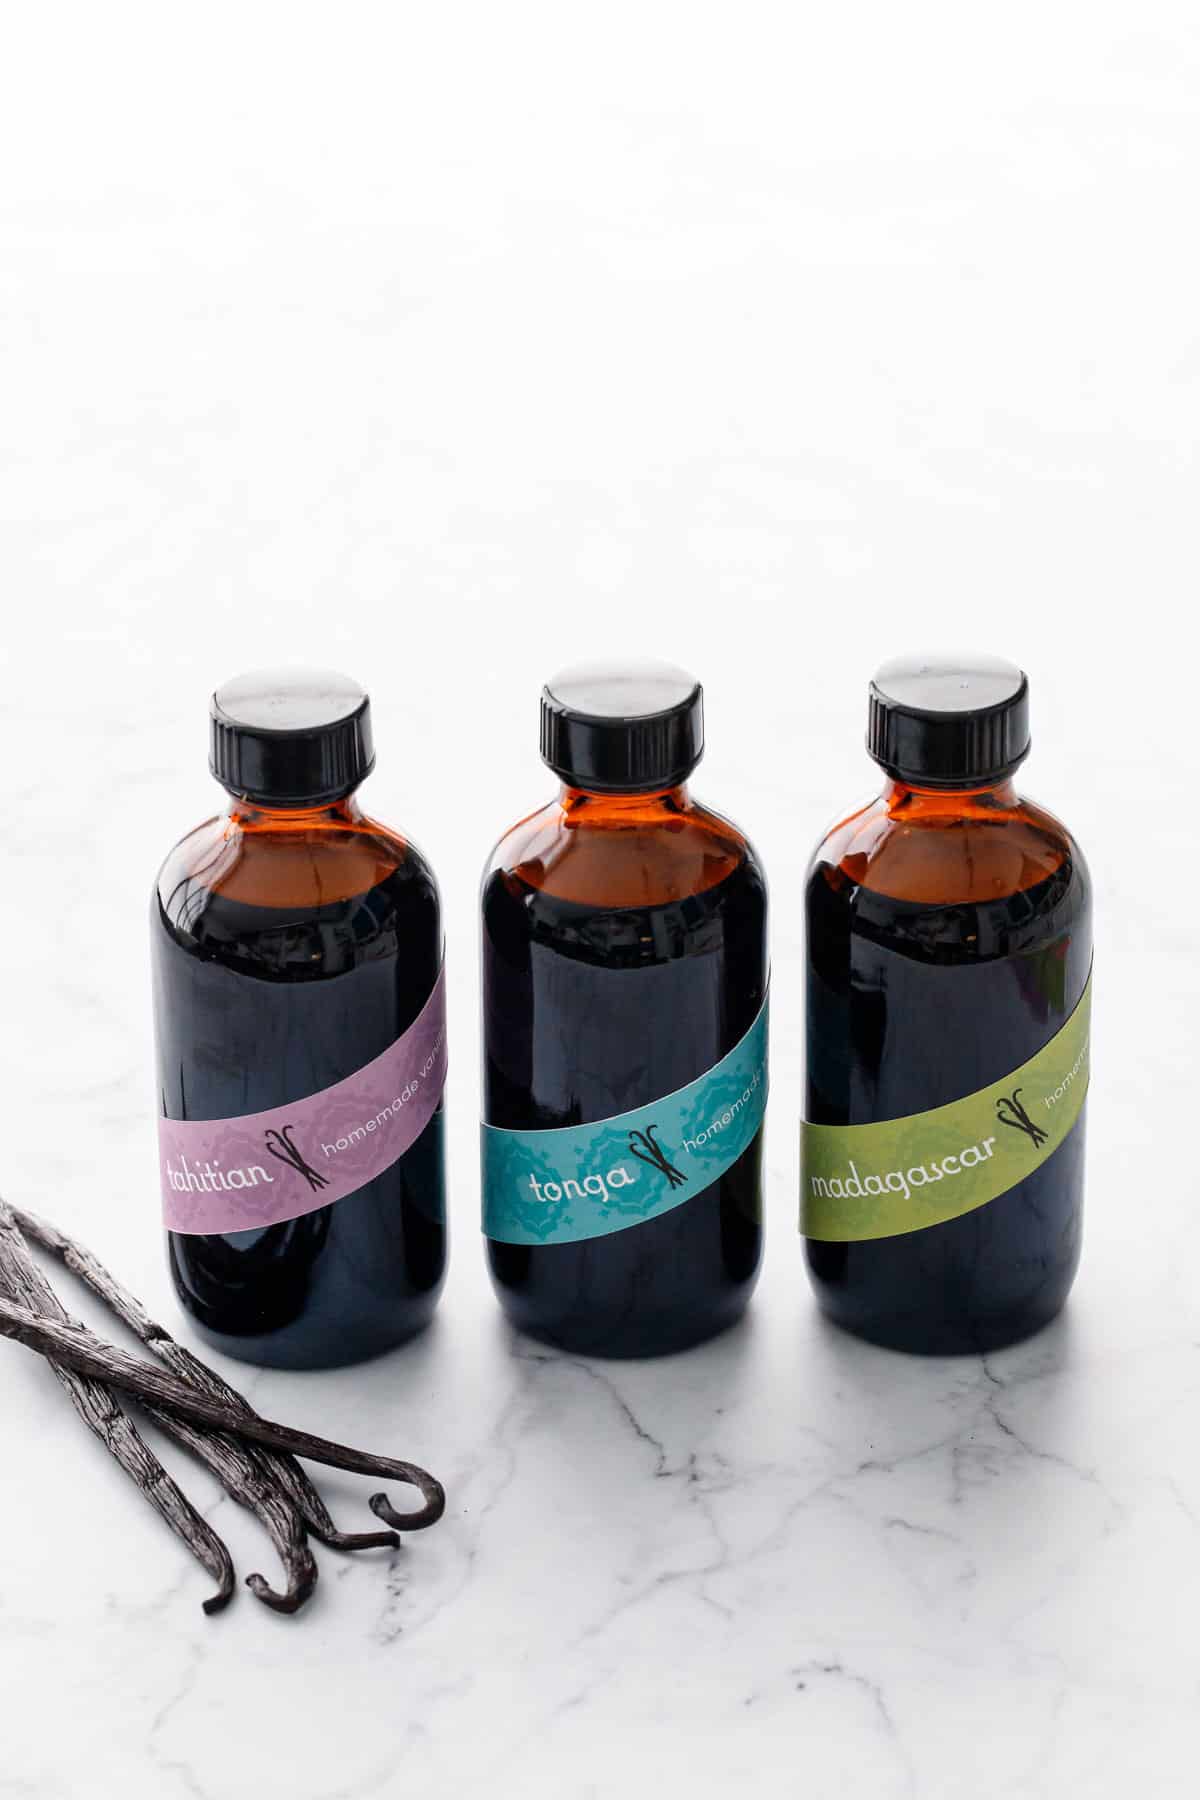 Three amber glass bottles filled with Homemade Vanilla Extract and colorful labels, with a few vanilla beans on the side.